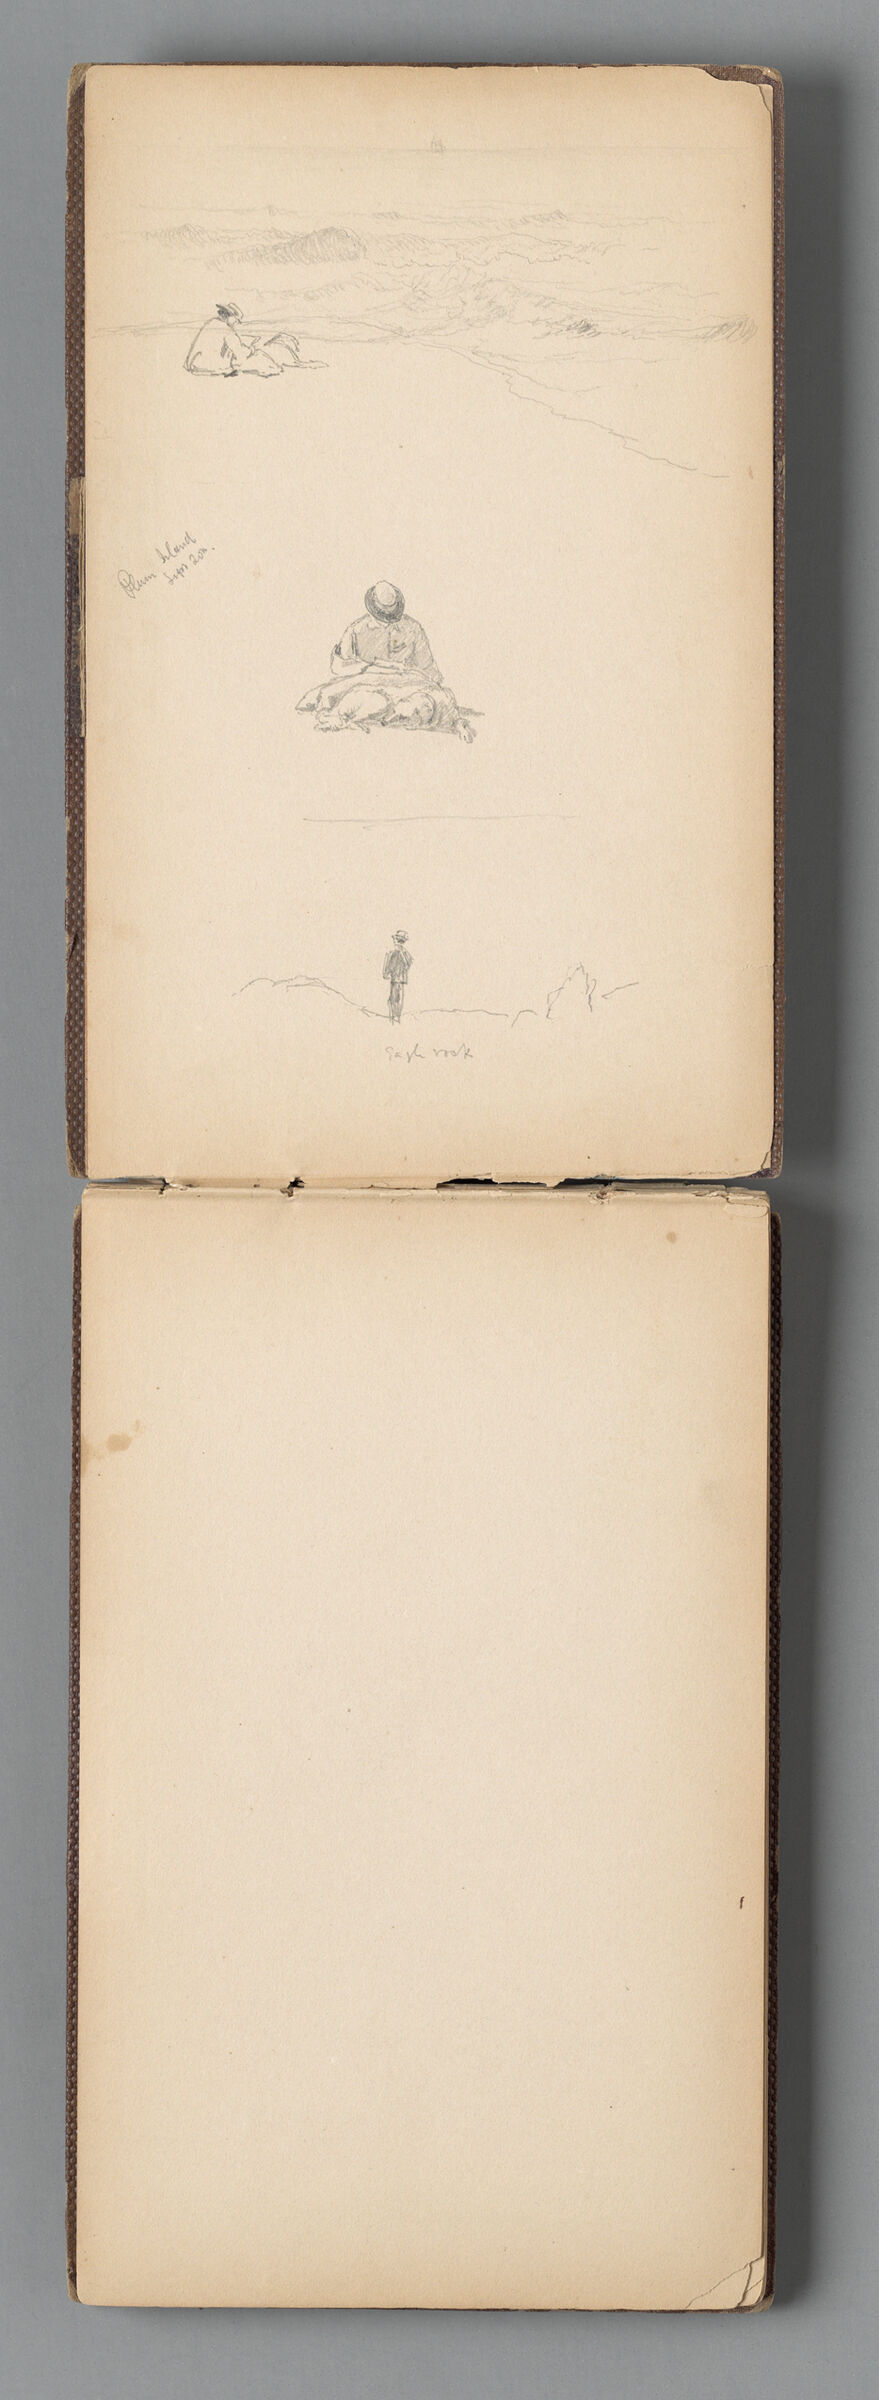 Sketches Of Figures; Verso: Hill And Ocean